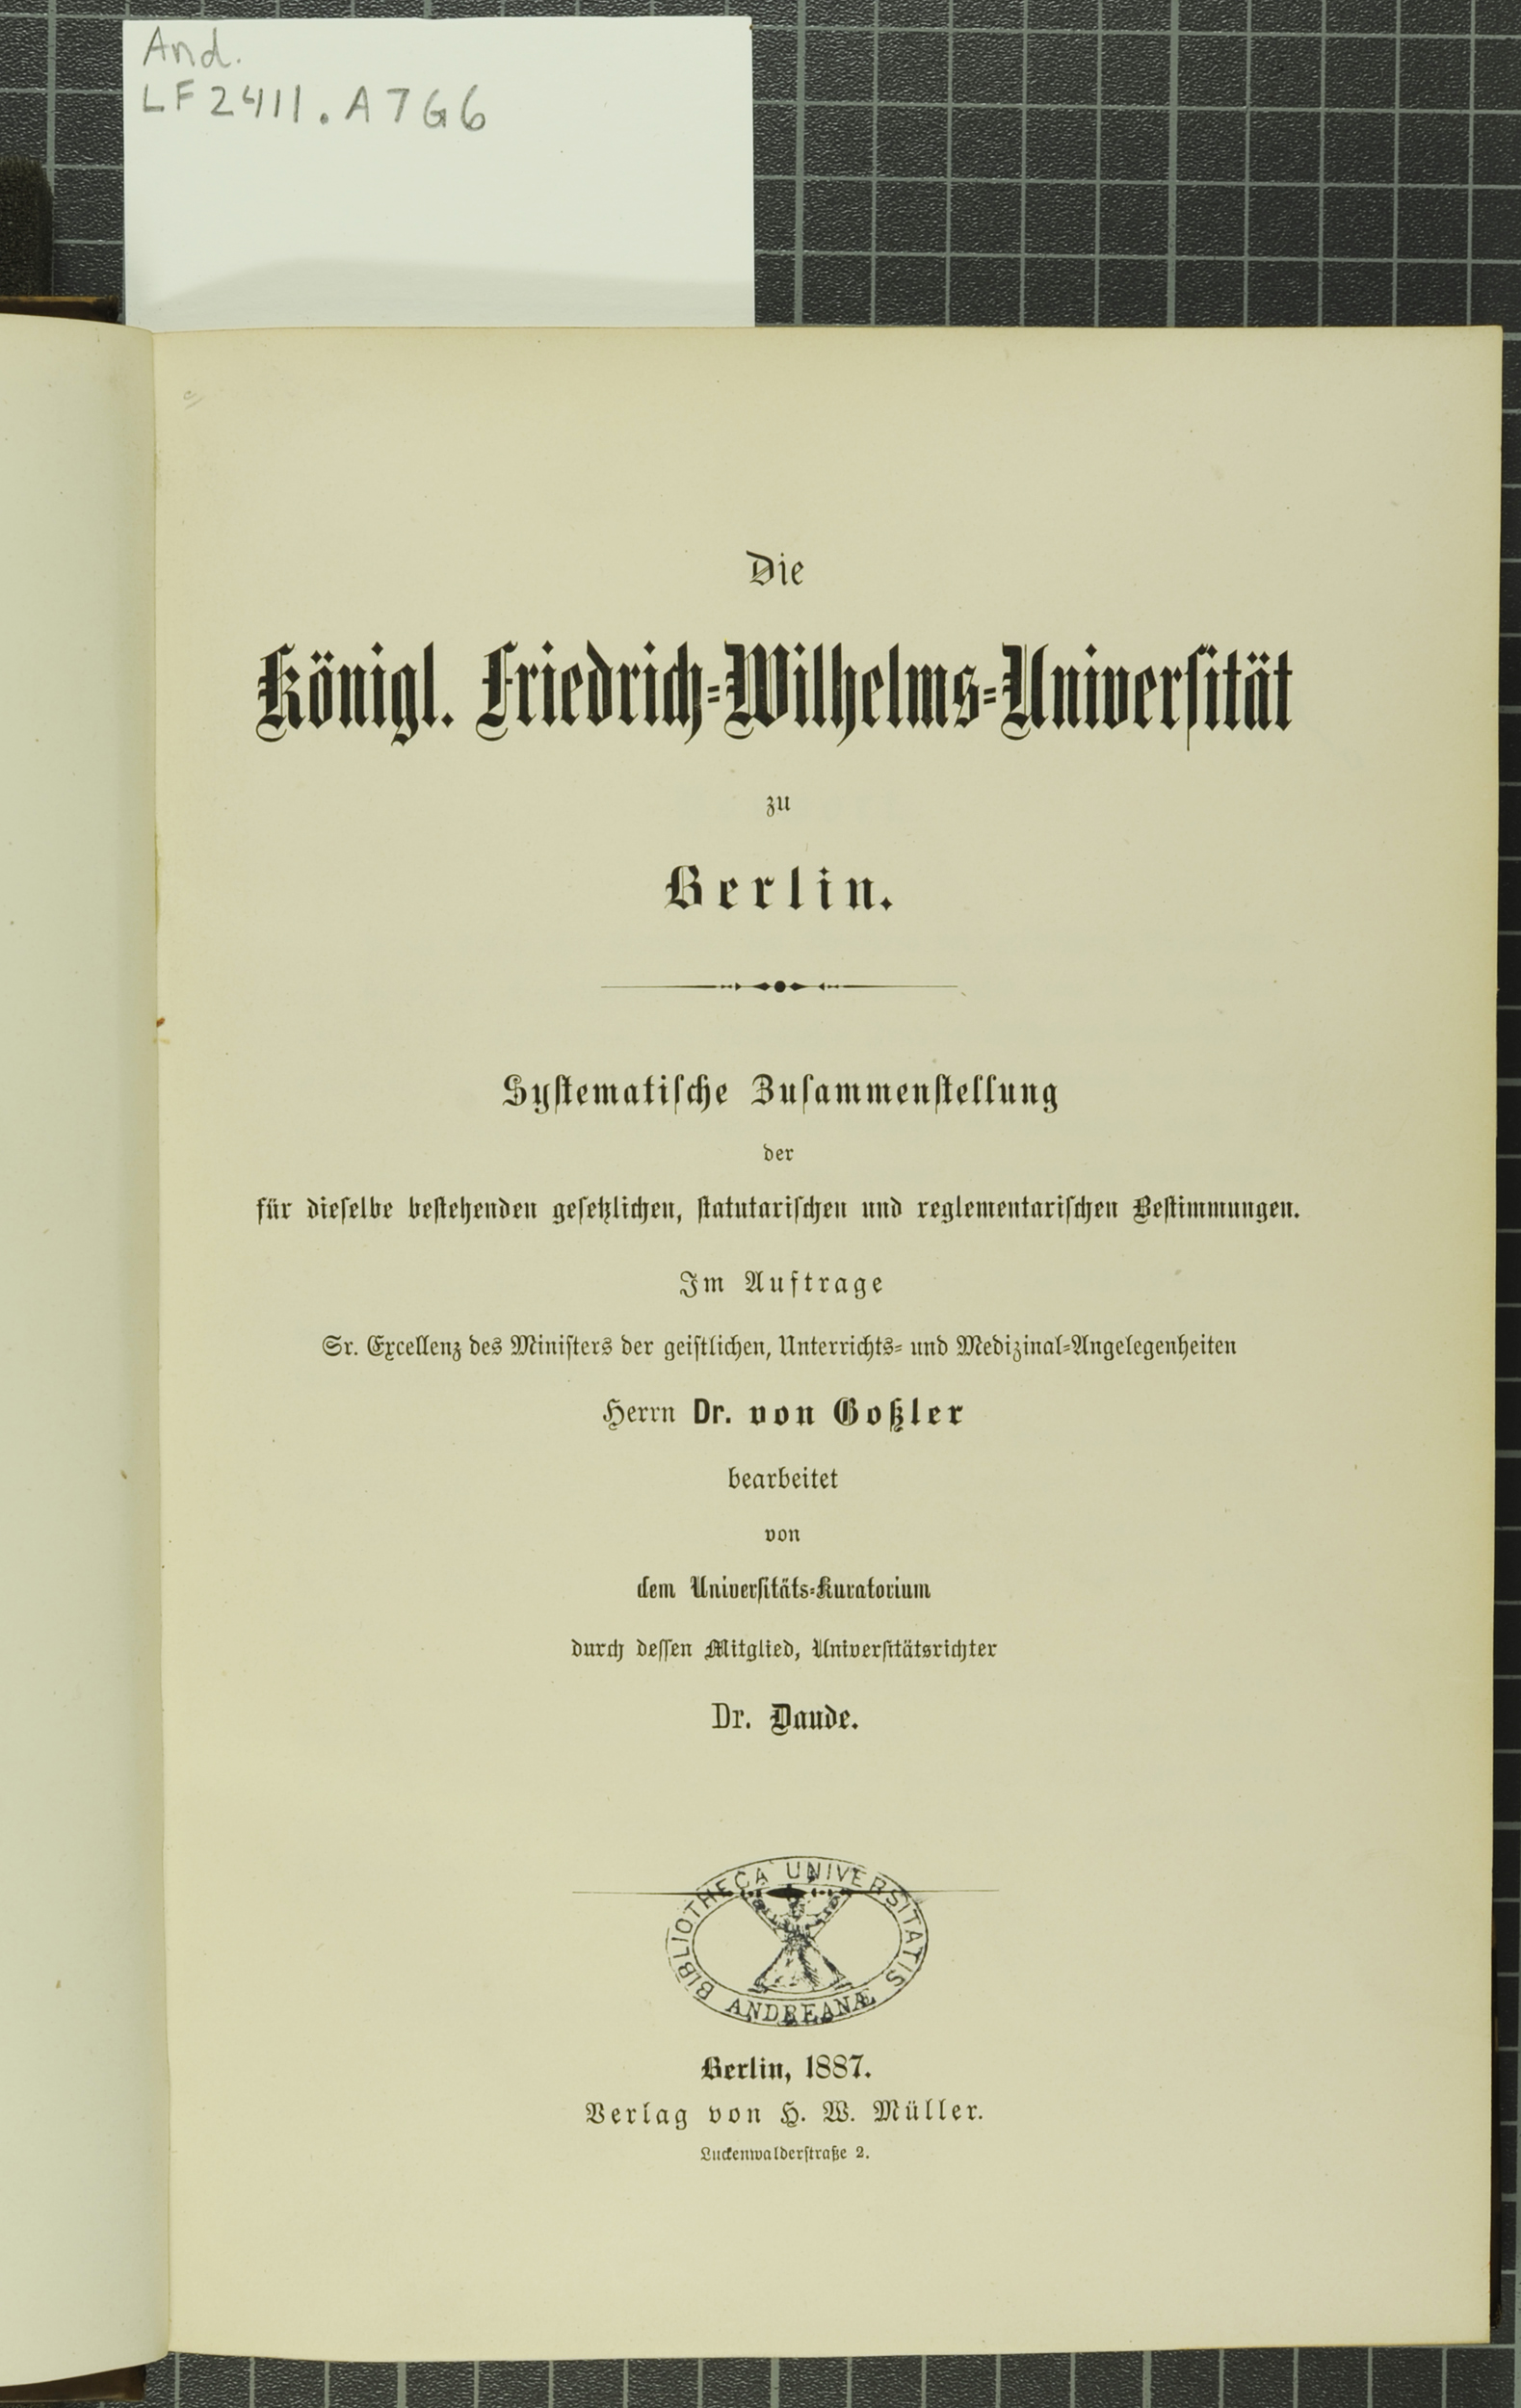 An example of one of the many book of records Anderson collected from universities across Europe. Die Königl. Friedrich=Wilhelms=Universität zu Berlin is from the University of Berlin. (And LF2411.A7G6)